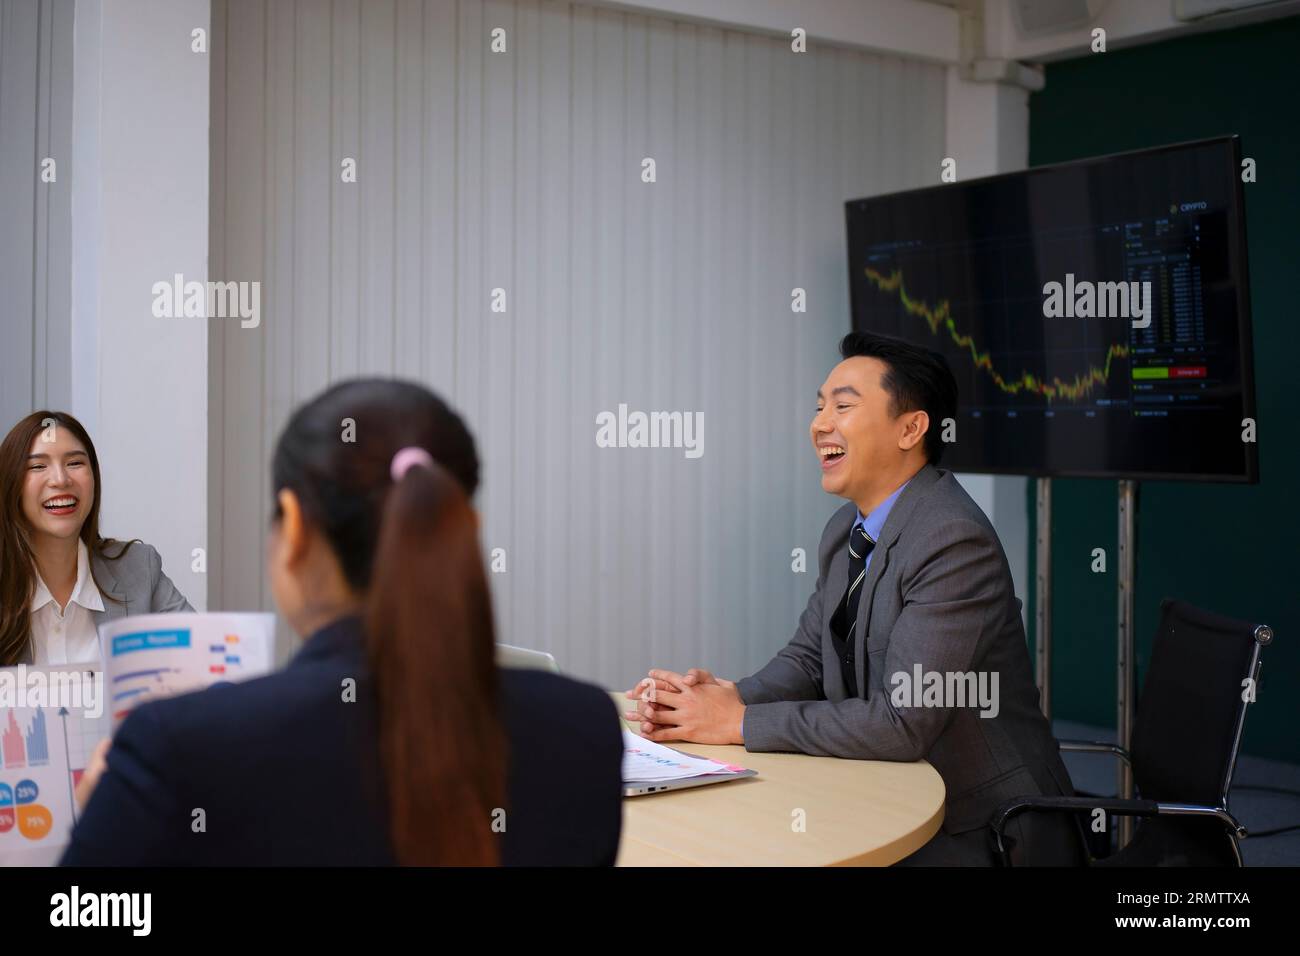 Employees are meeting at office. White collar worker concept. Stock Photo